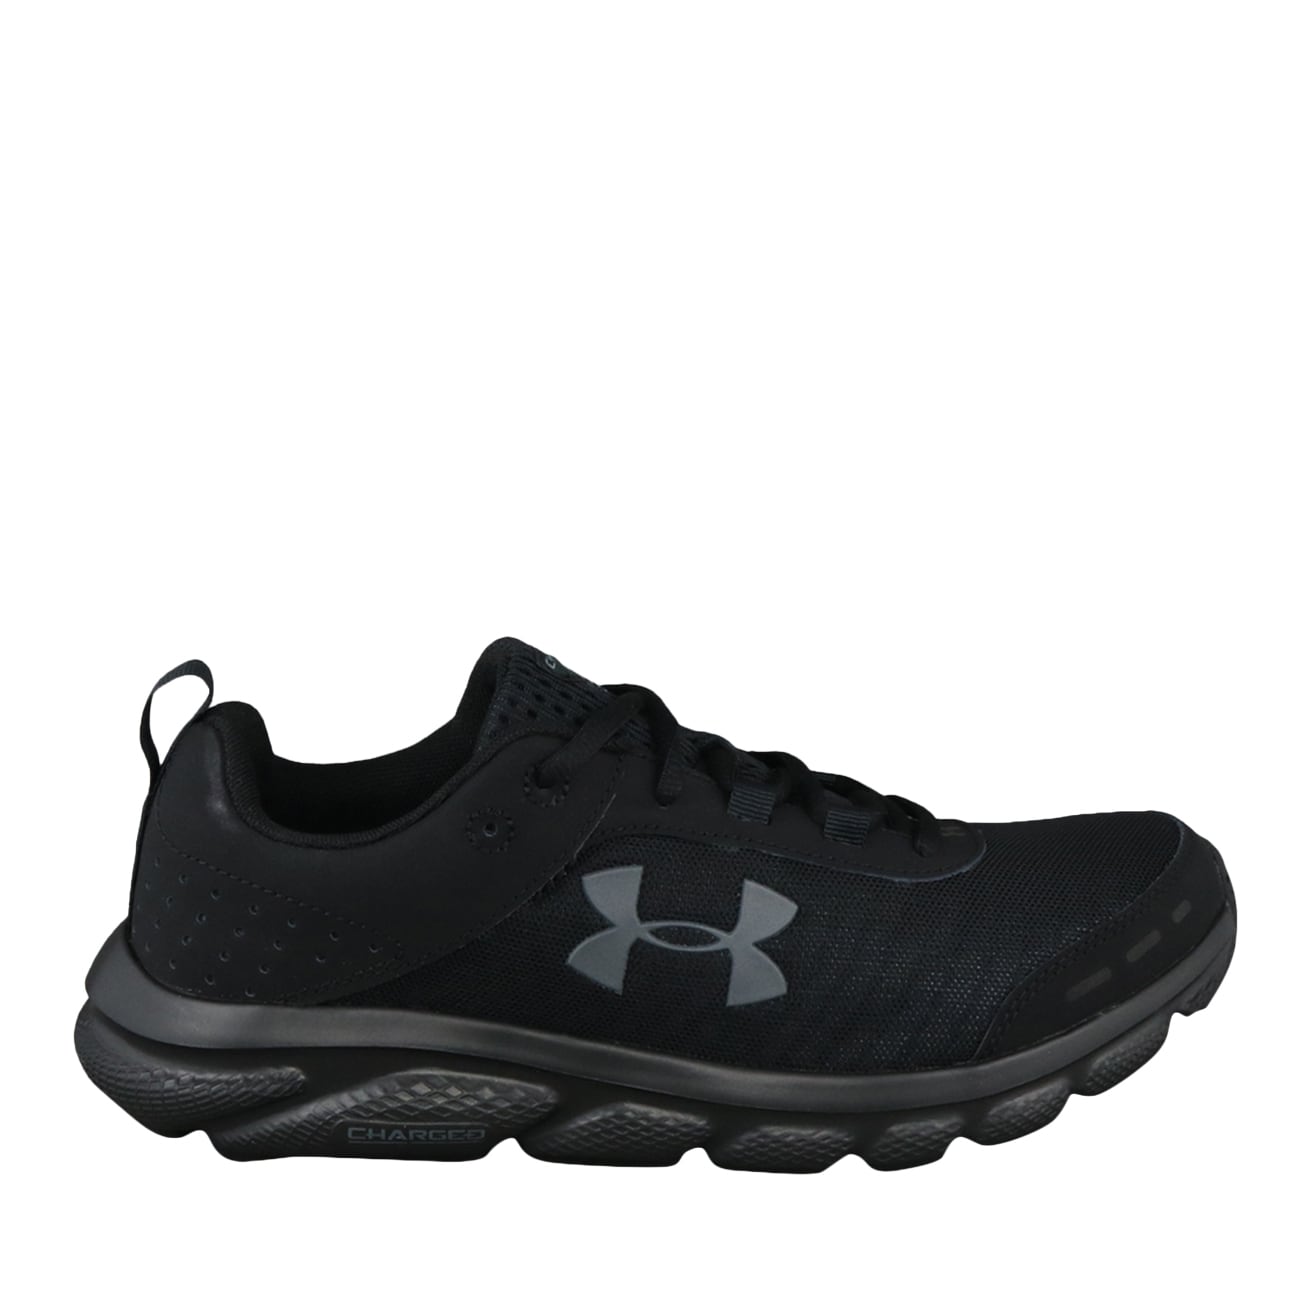 UNDER ARMOUR Men's Charged Assert 8 Running Shoe | The Shoe Company